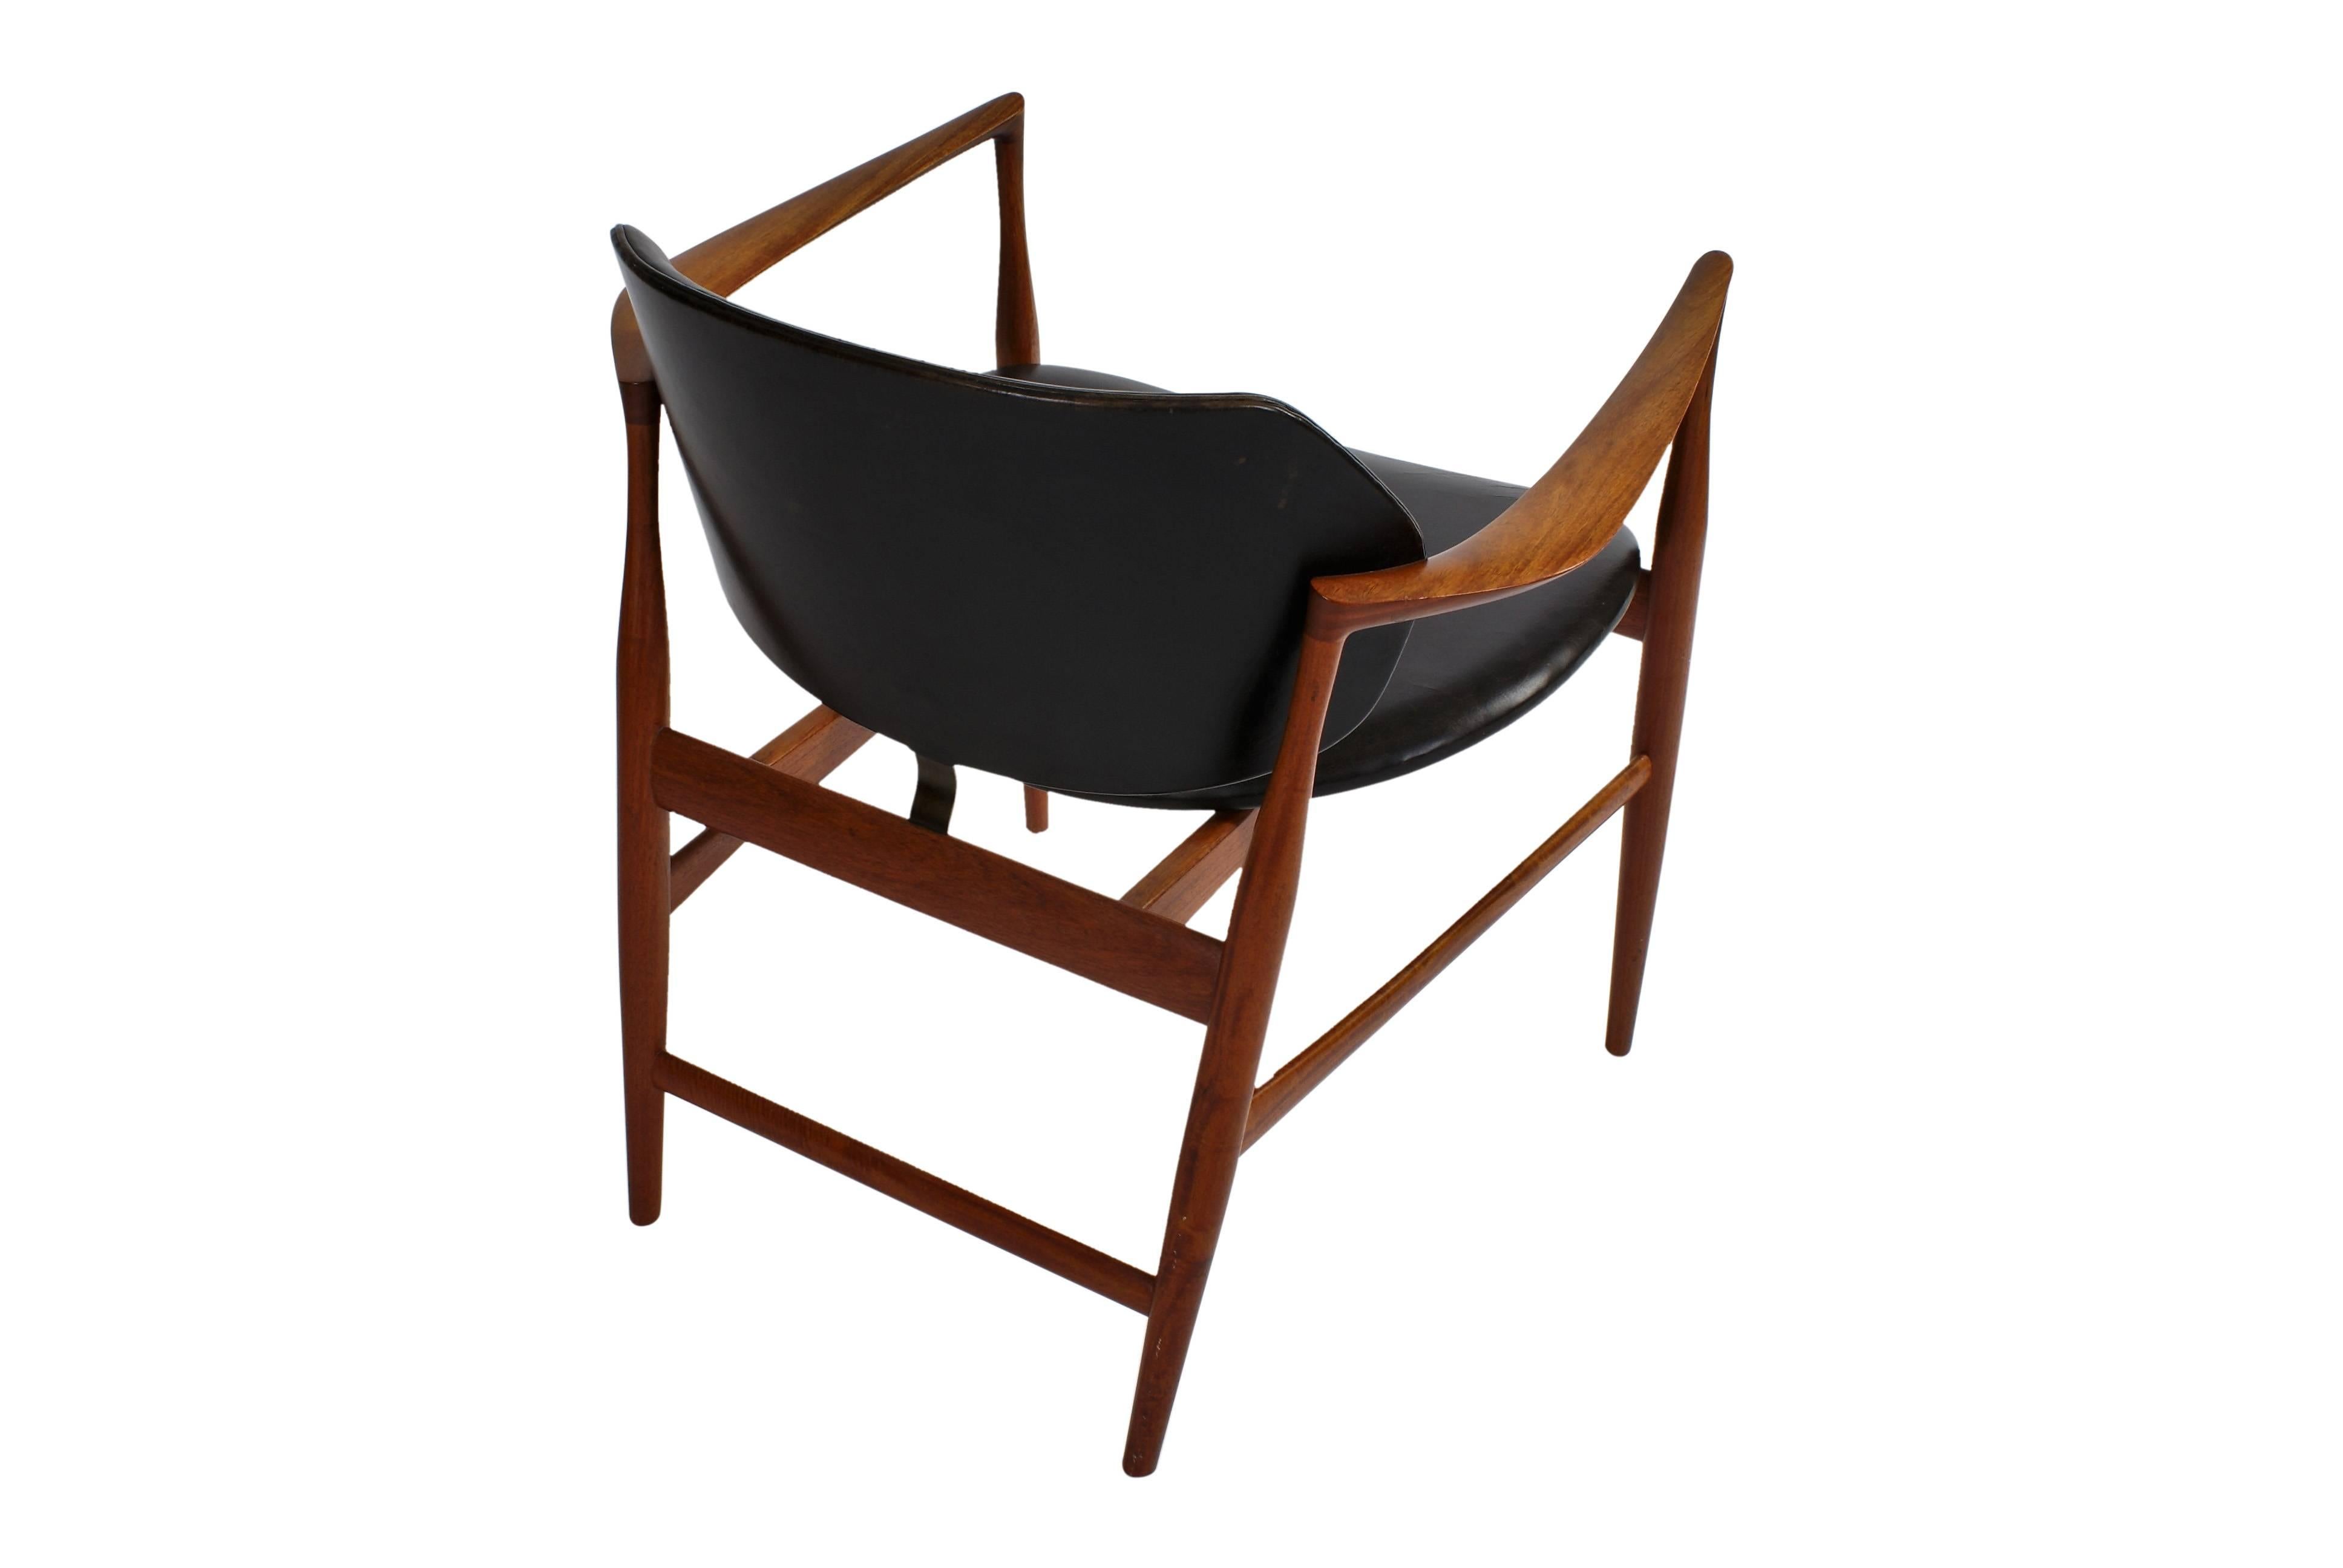 Mid-20th Century Ib Kofod-Larsen Rare 'Elizabeth' Armchair in Cuban Mahogany and Black Leather For Sale